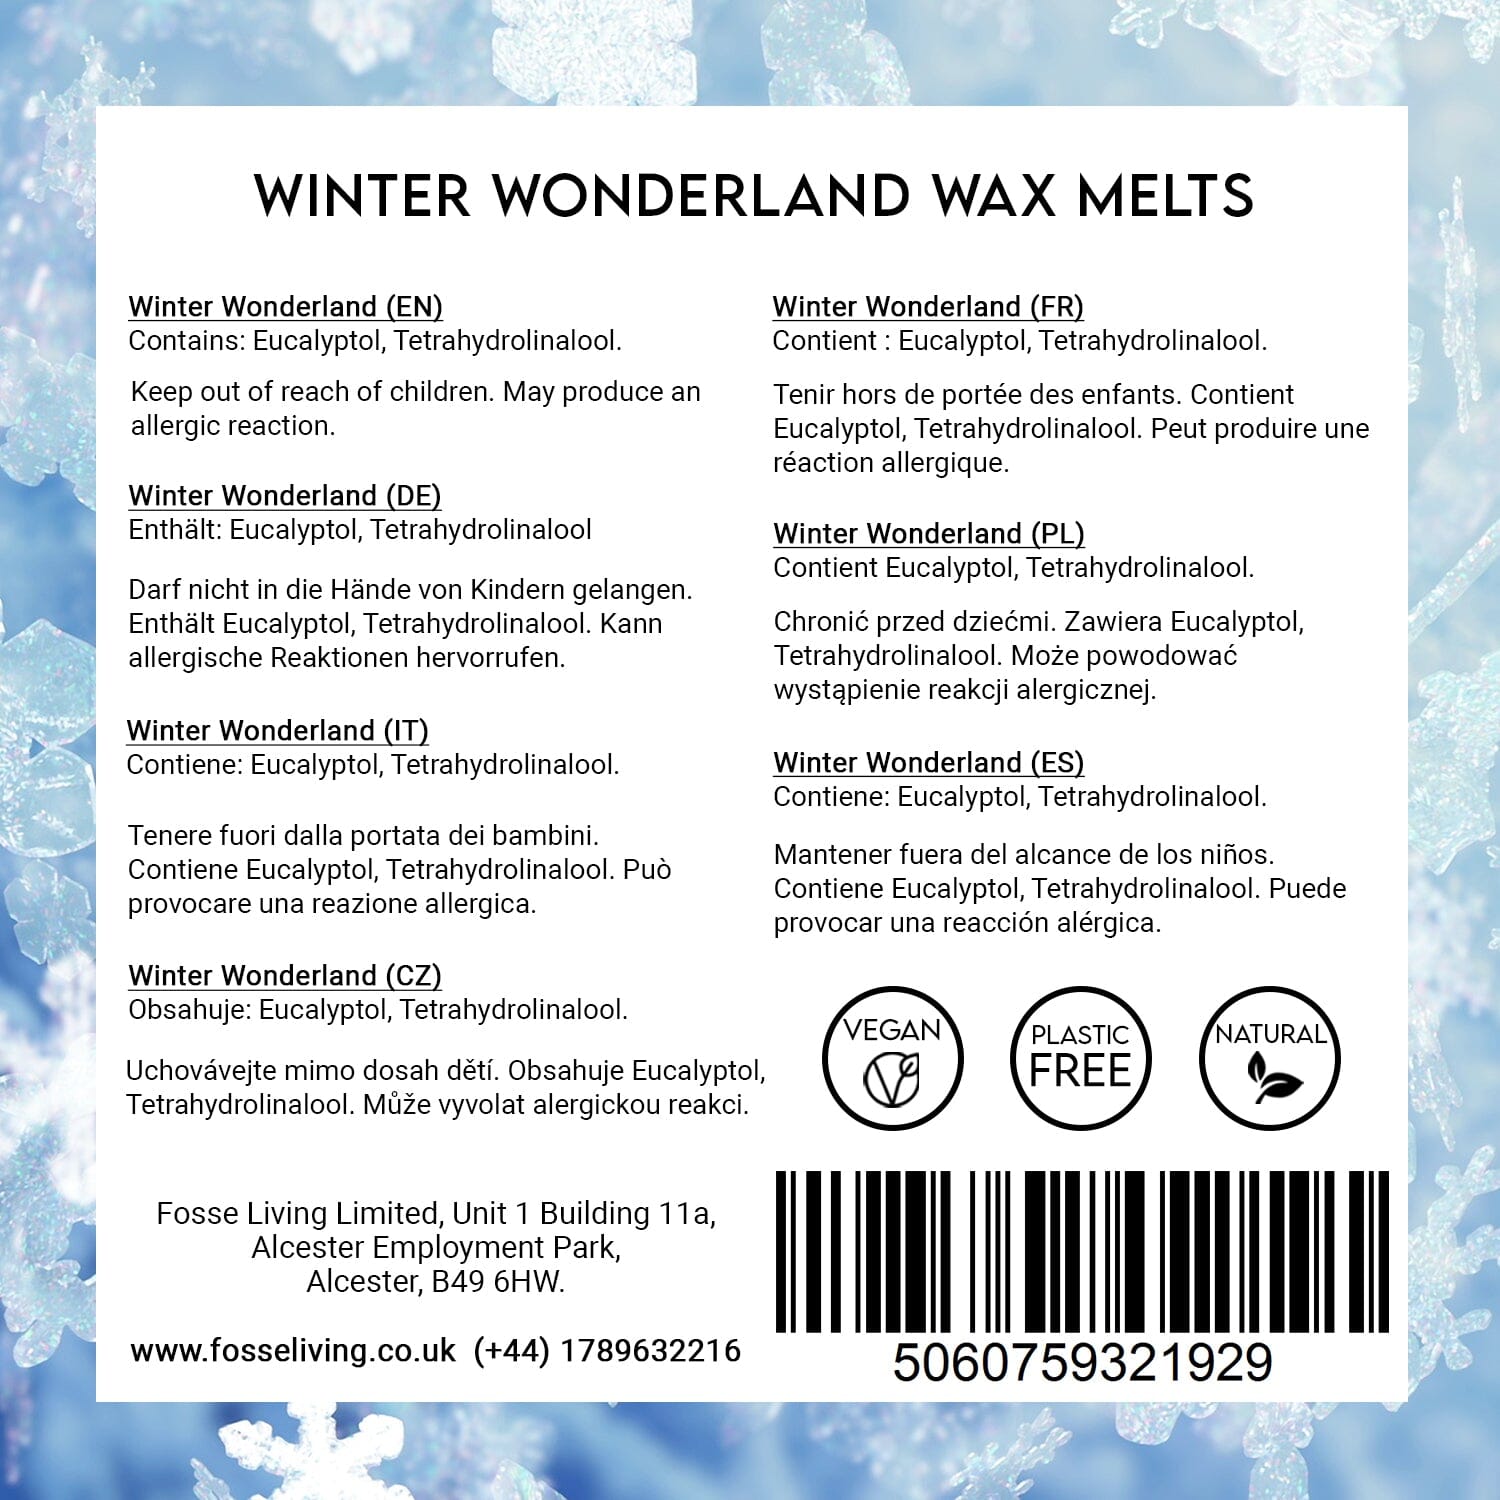 Winter Wonderland Highly Scented christmas and spring Soy Wax Melt Hearts - 16 Pack (Limited Edition) Fosse Living CLP safety information